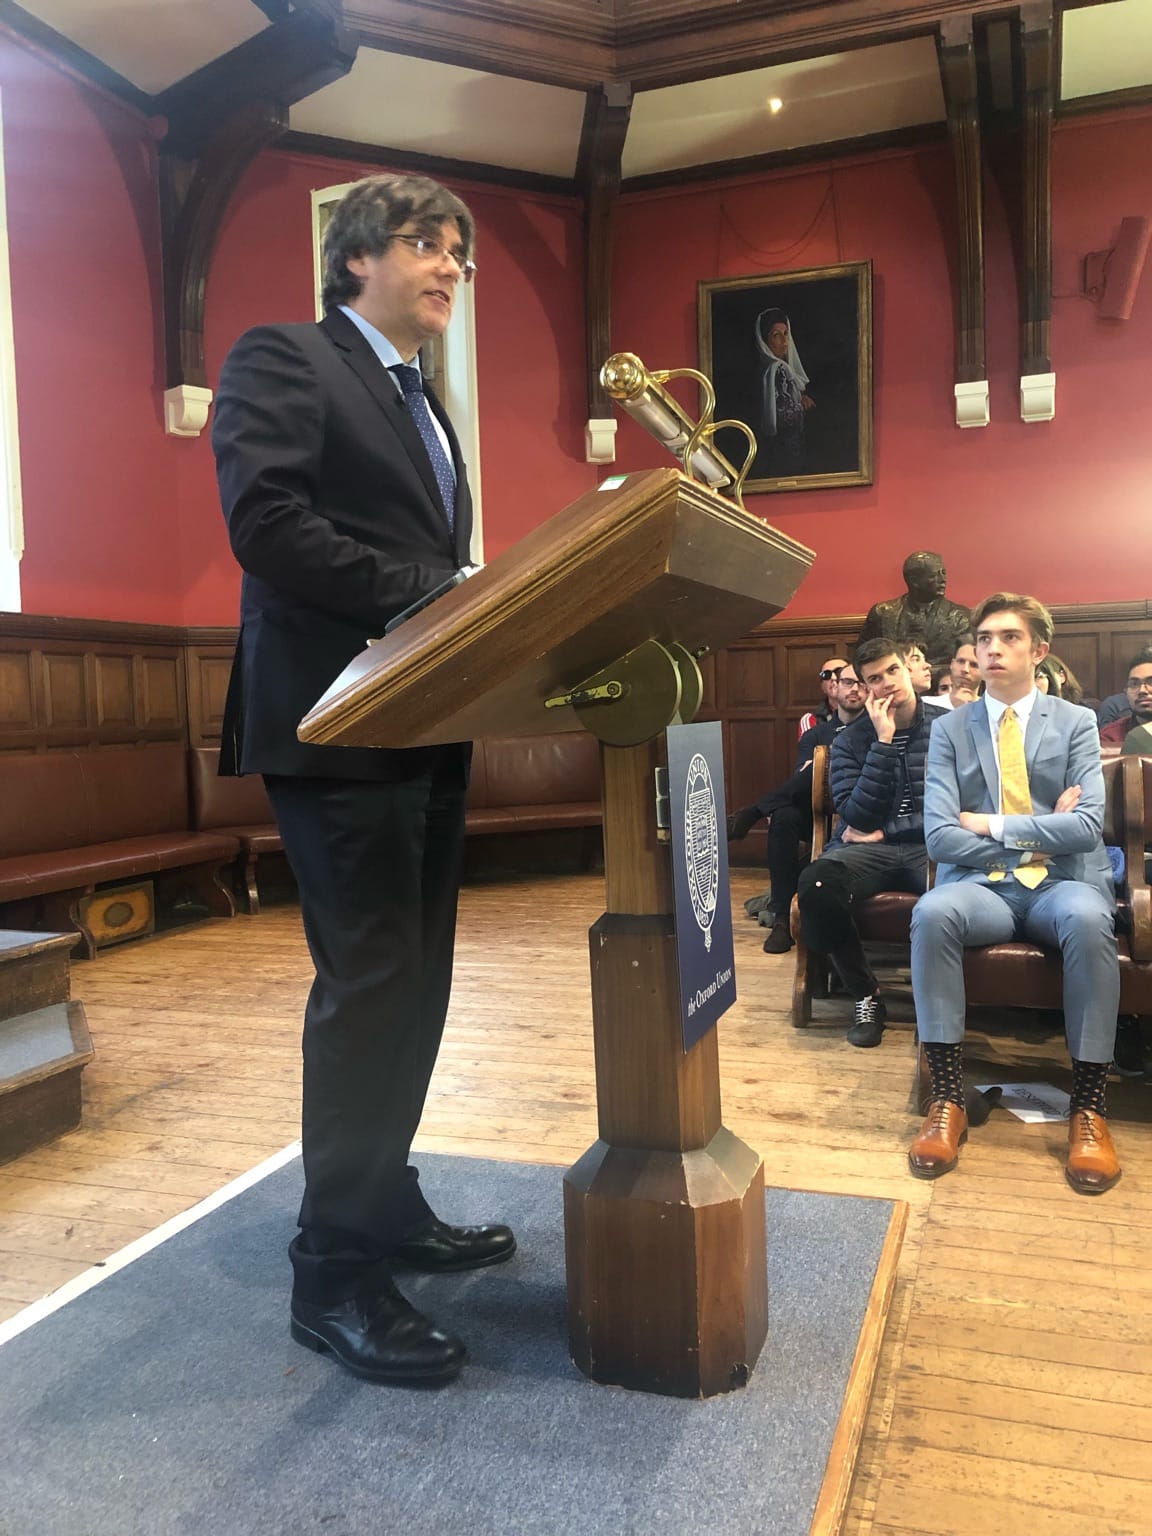 Carles Puigdemont speaks at the Oxford Union